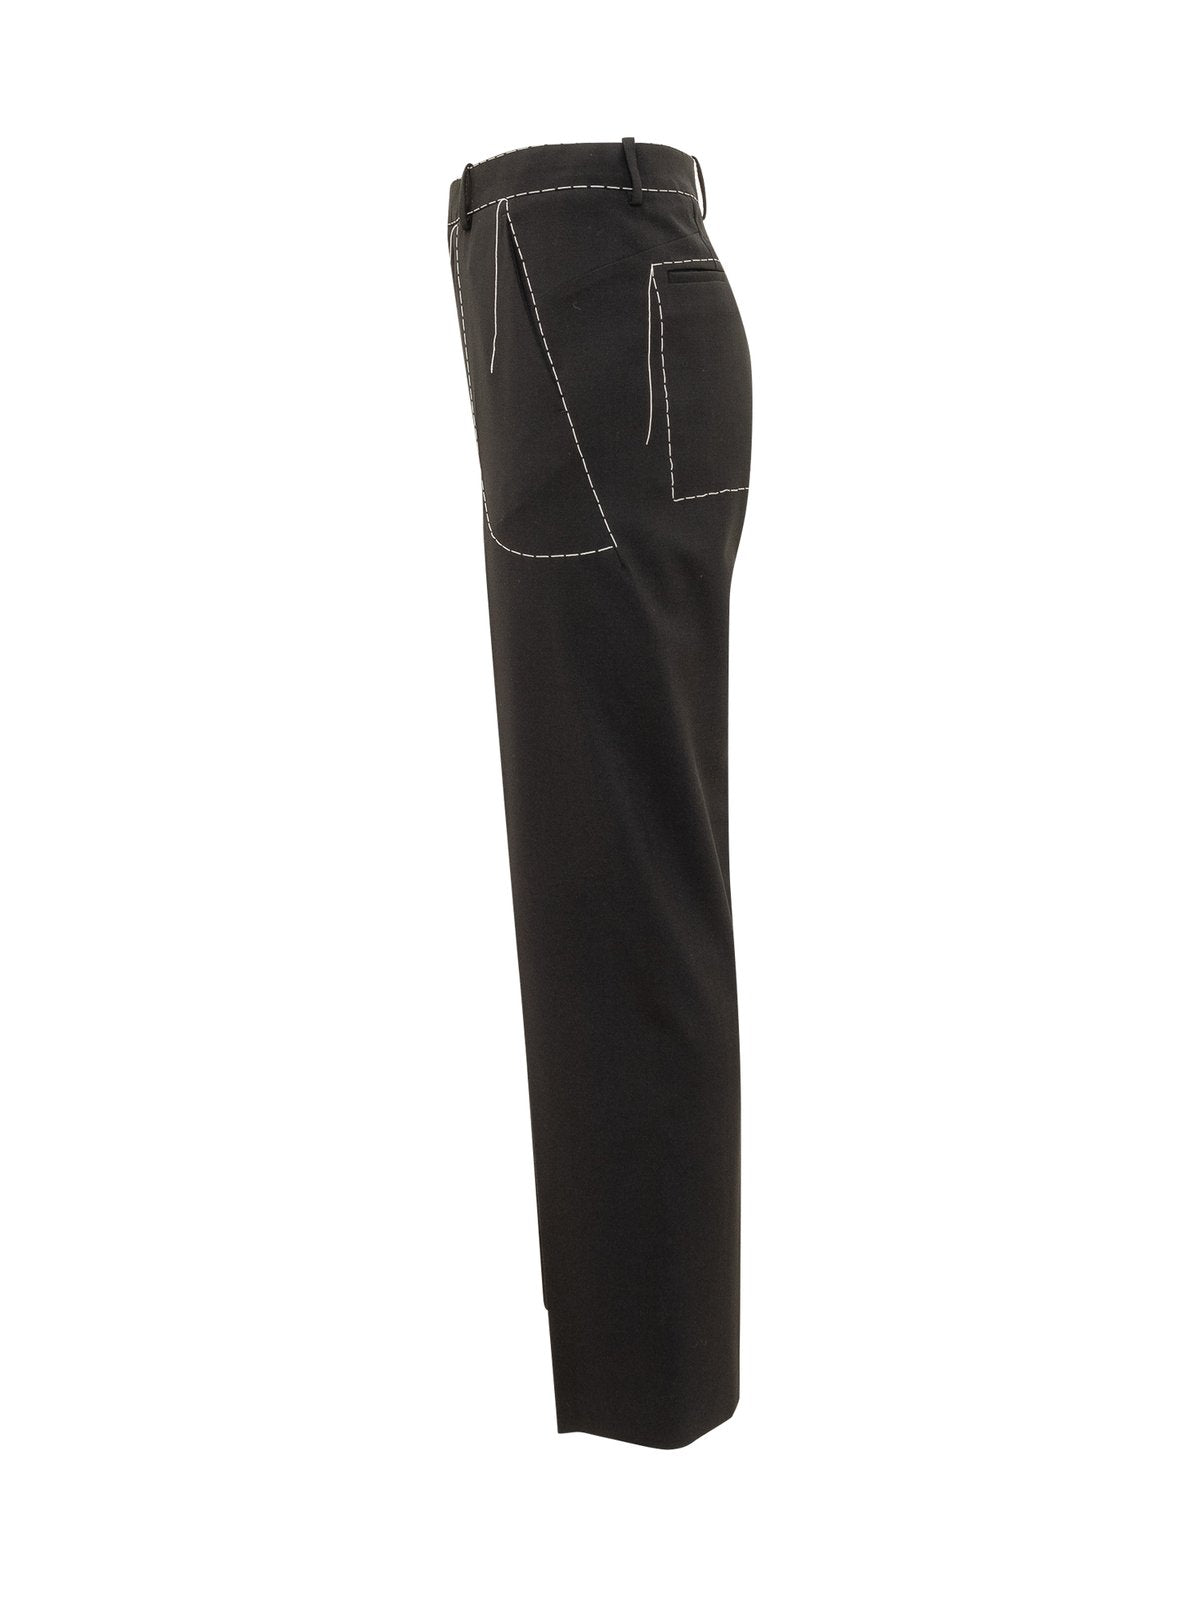 Off-White Contrasting Line Straight Leg Trousers